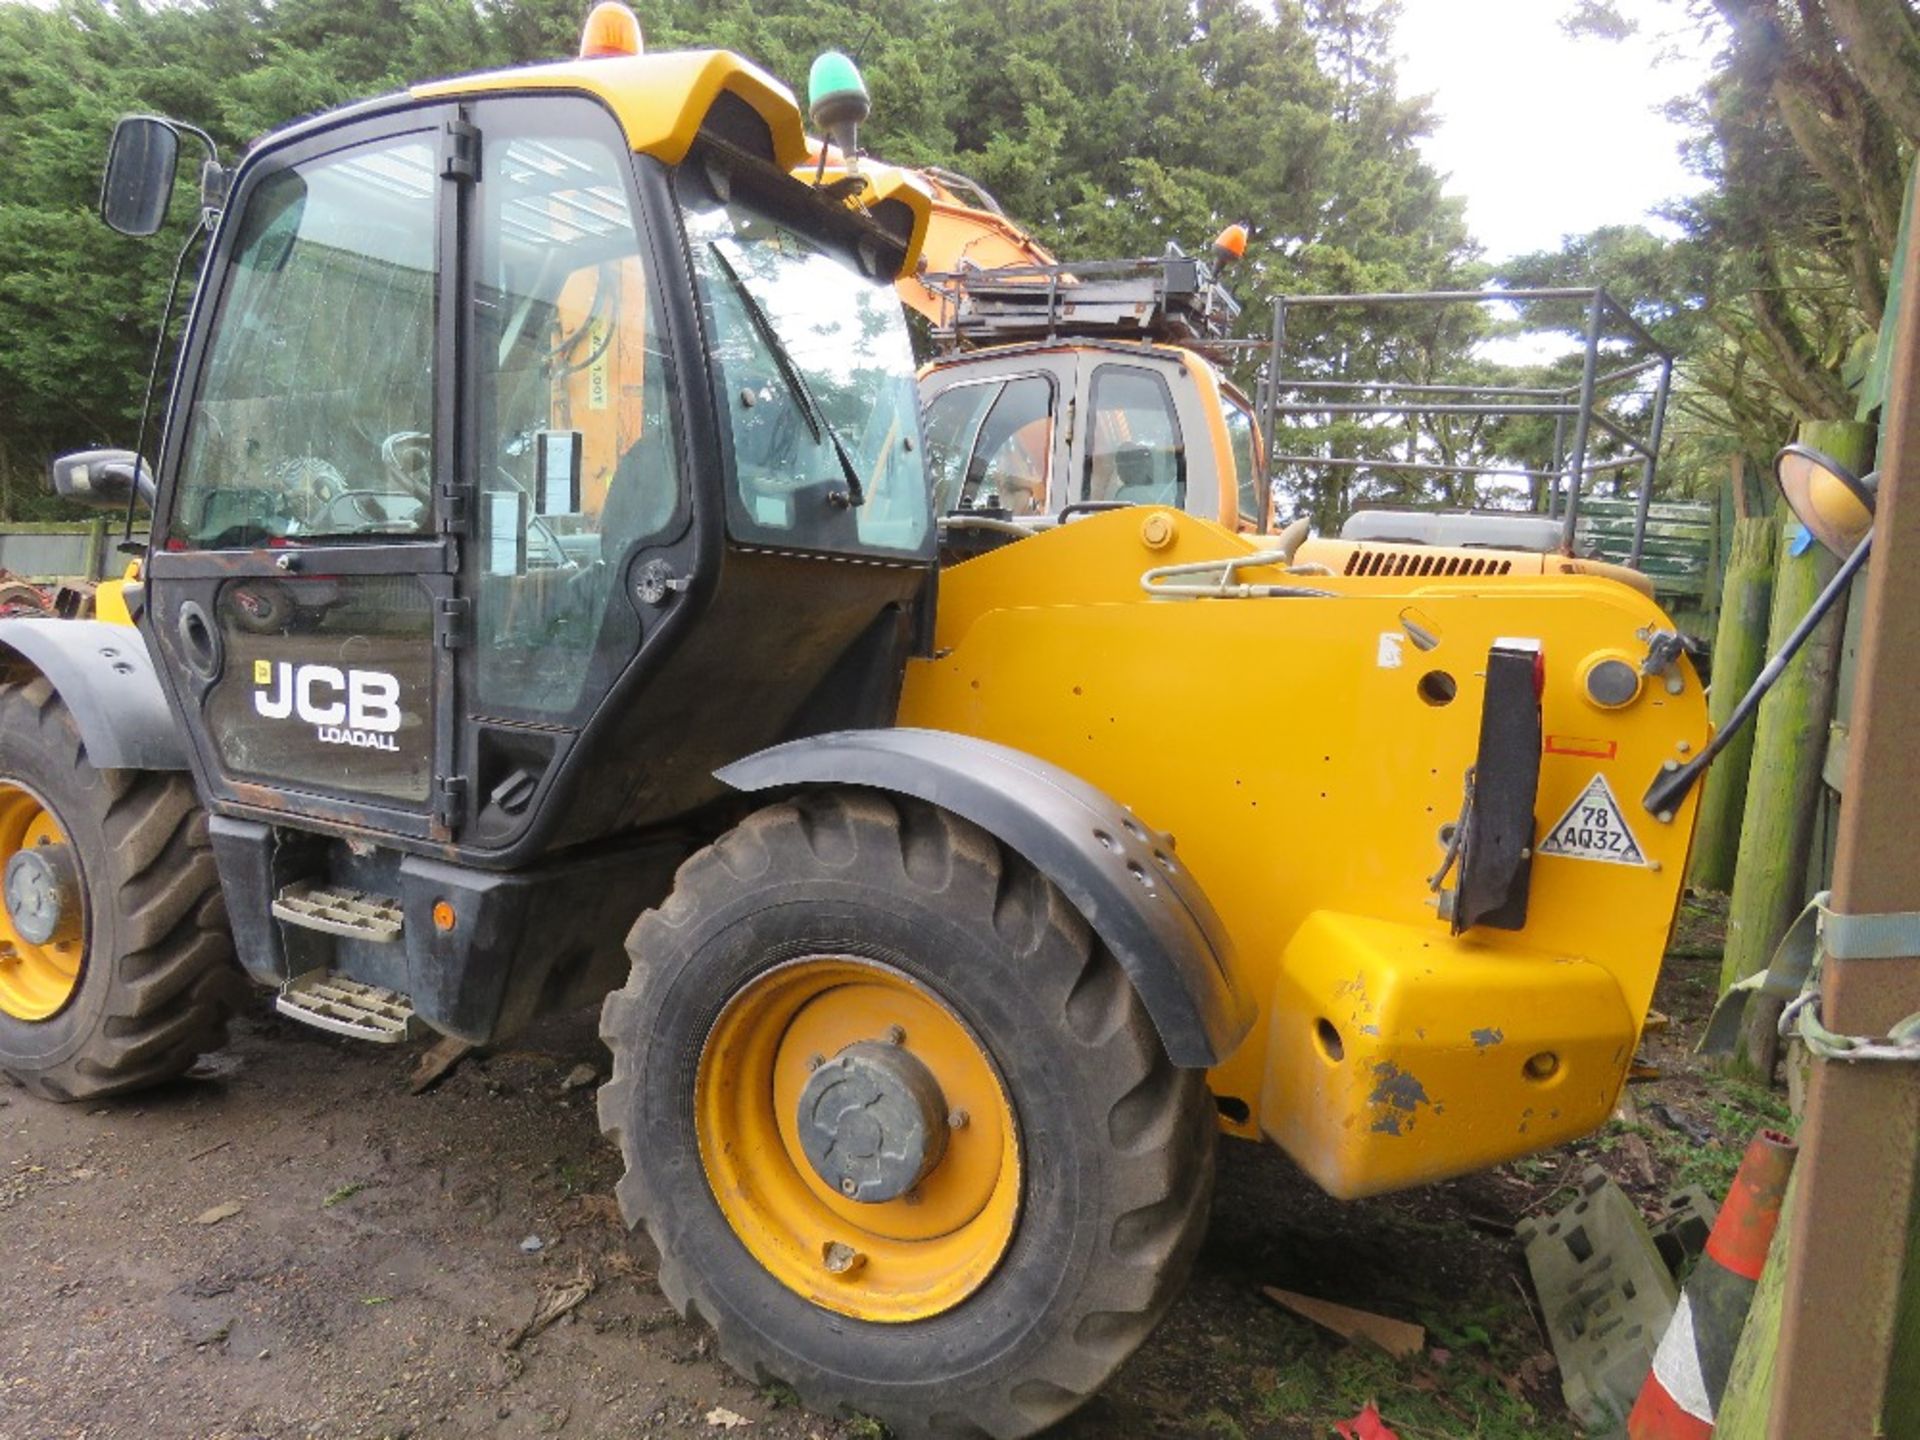 JCB 540-140 TELEHANDLER REG:RV17 YGT WITH V5. 14METRE REACH, 4 TONNE LIFT OWNED FROM NEW BY THE COMP - Image 7 of 23